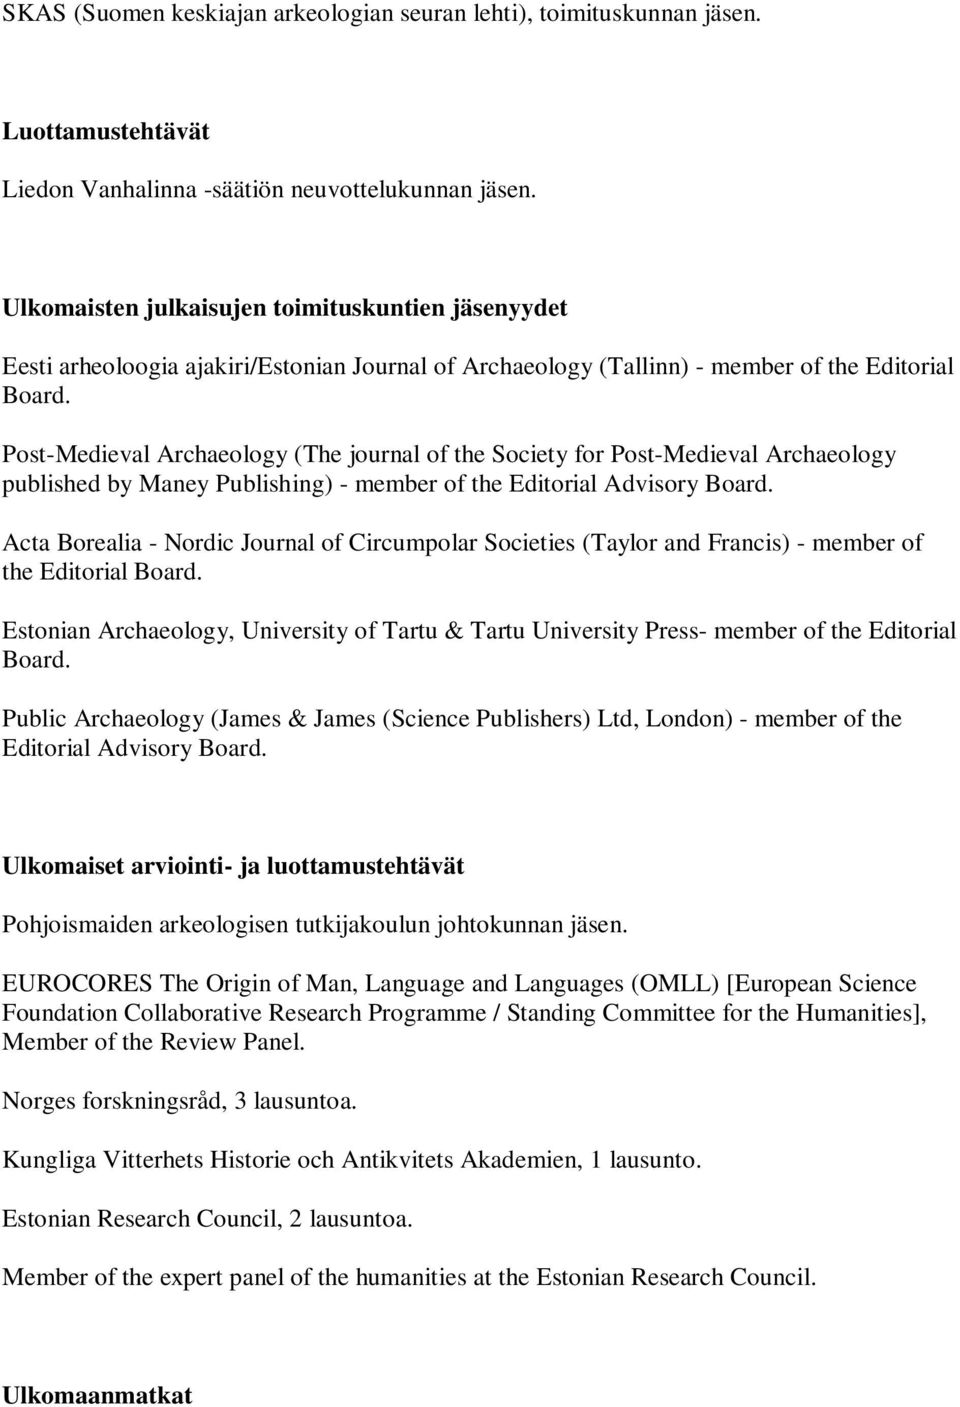 Post-Medieval Archaeology (The journal of the Society for Post-Medieval Archaeology published by Maney Publishing) - member of the Editorial Advisory Board.